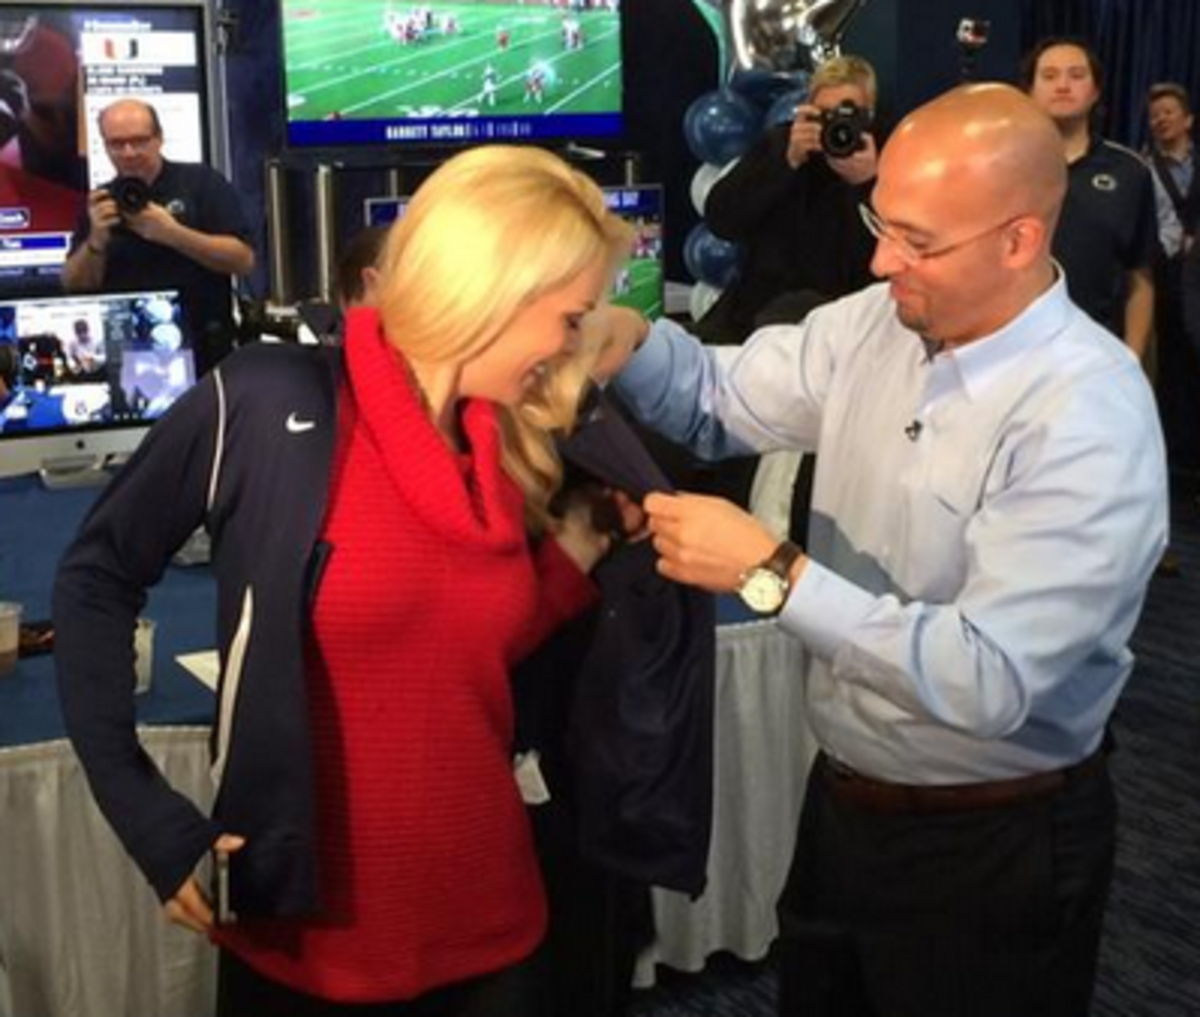 James Franklin gives Britt McHenry a blue jacket to wear.